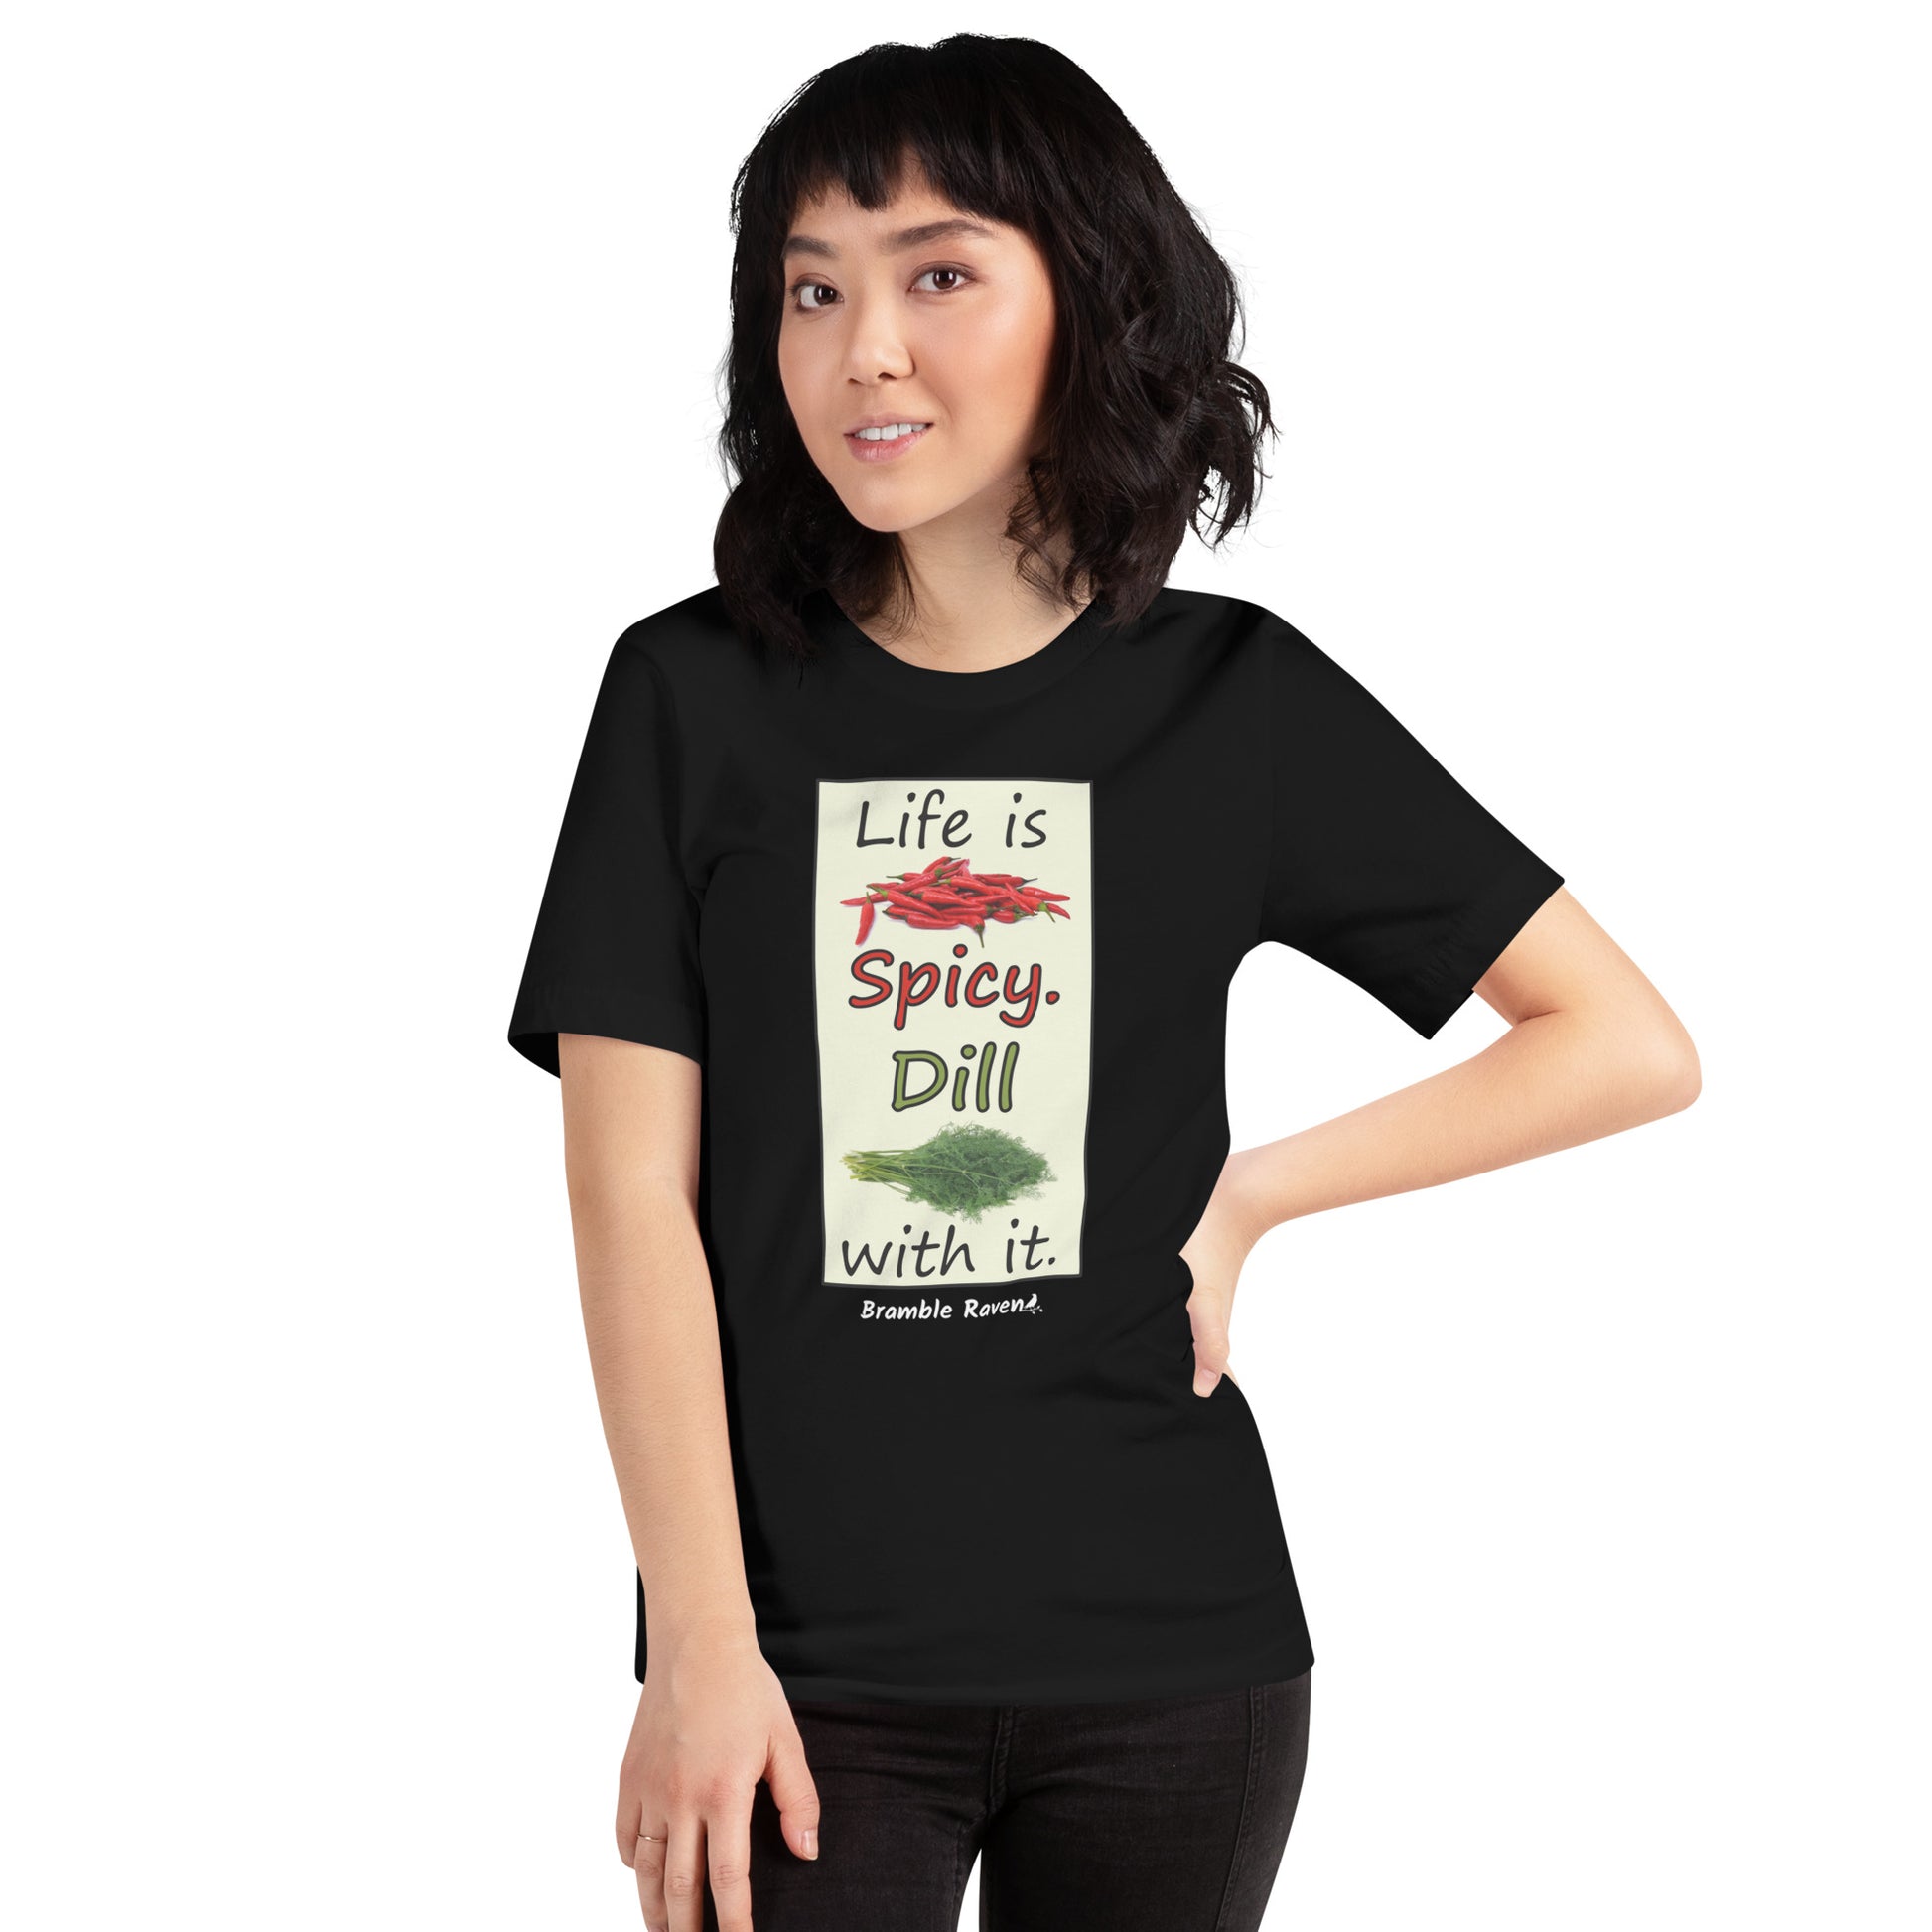 Life is spicy. Dill with it. Phrase with images of chili peppers and dill weed. Rectangular frame for saying on black colored unisex t-shirt. Shown on female model.